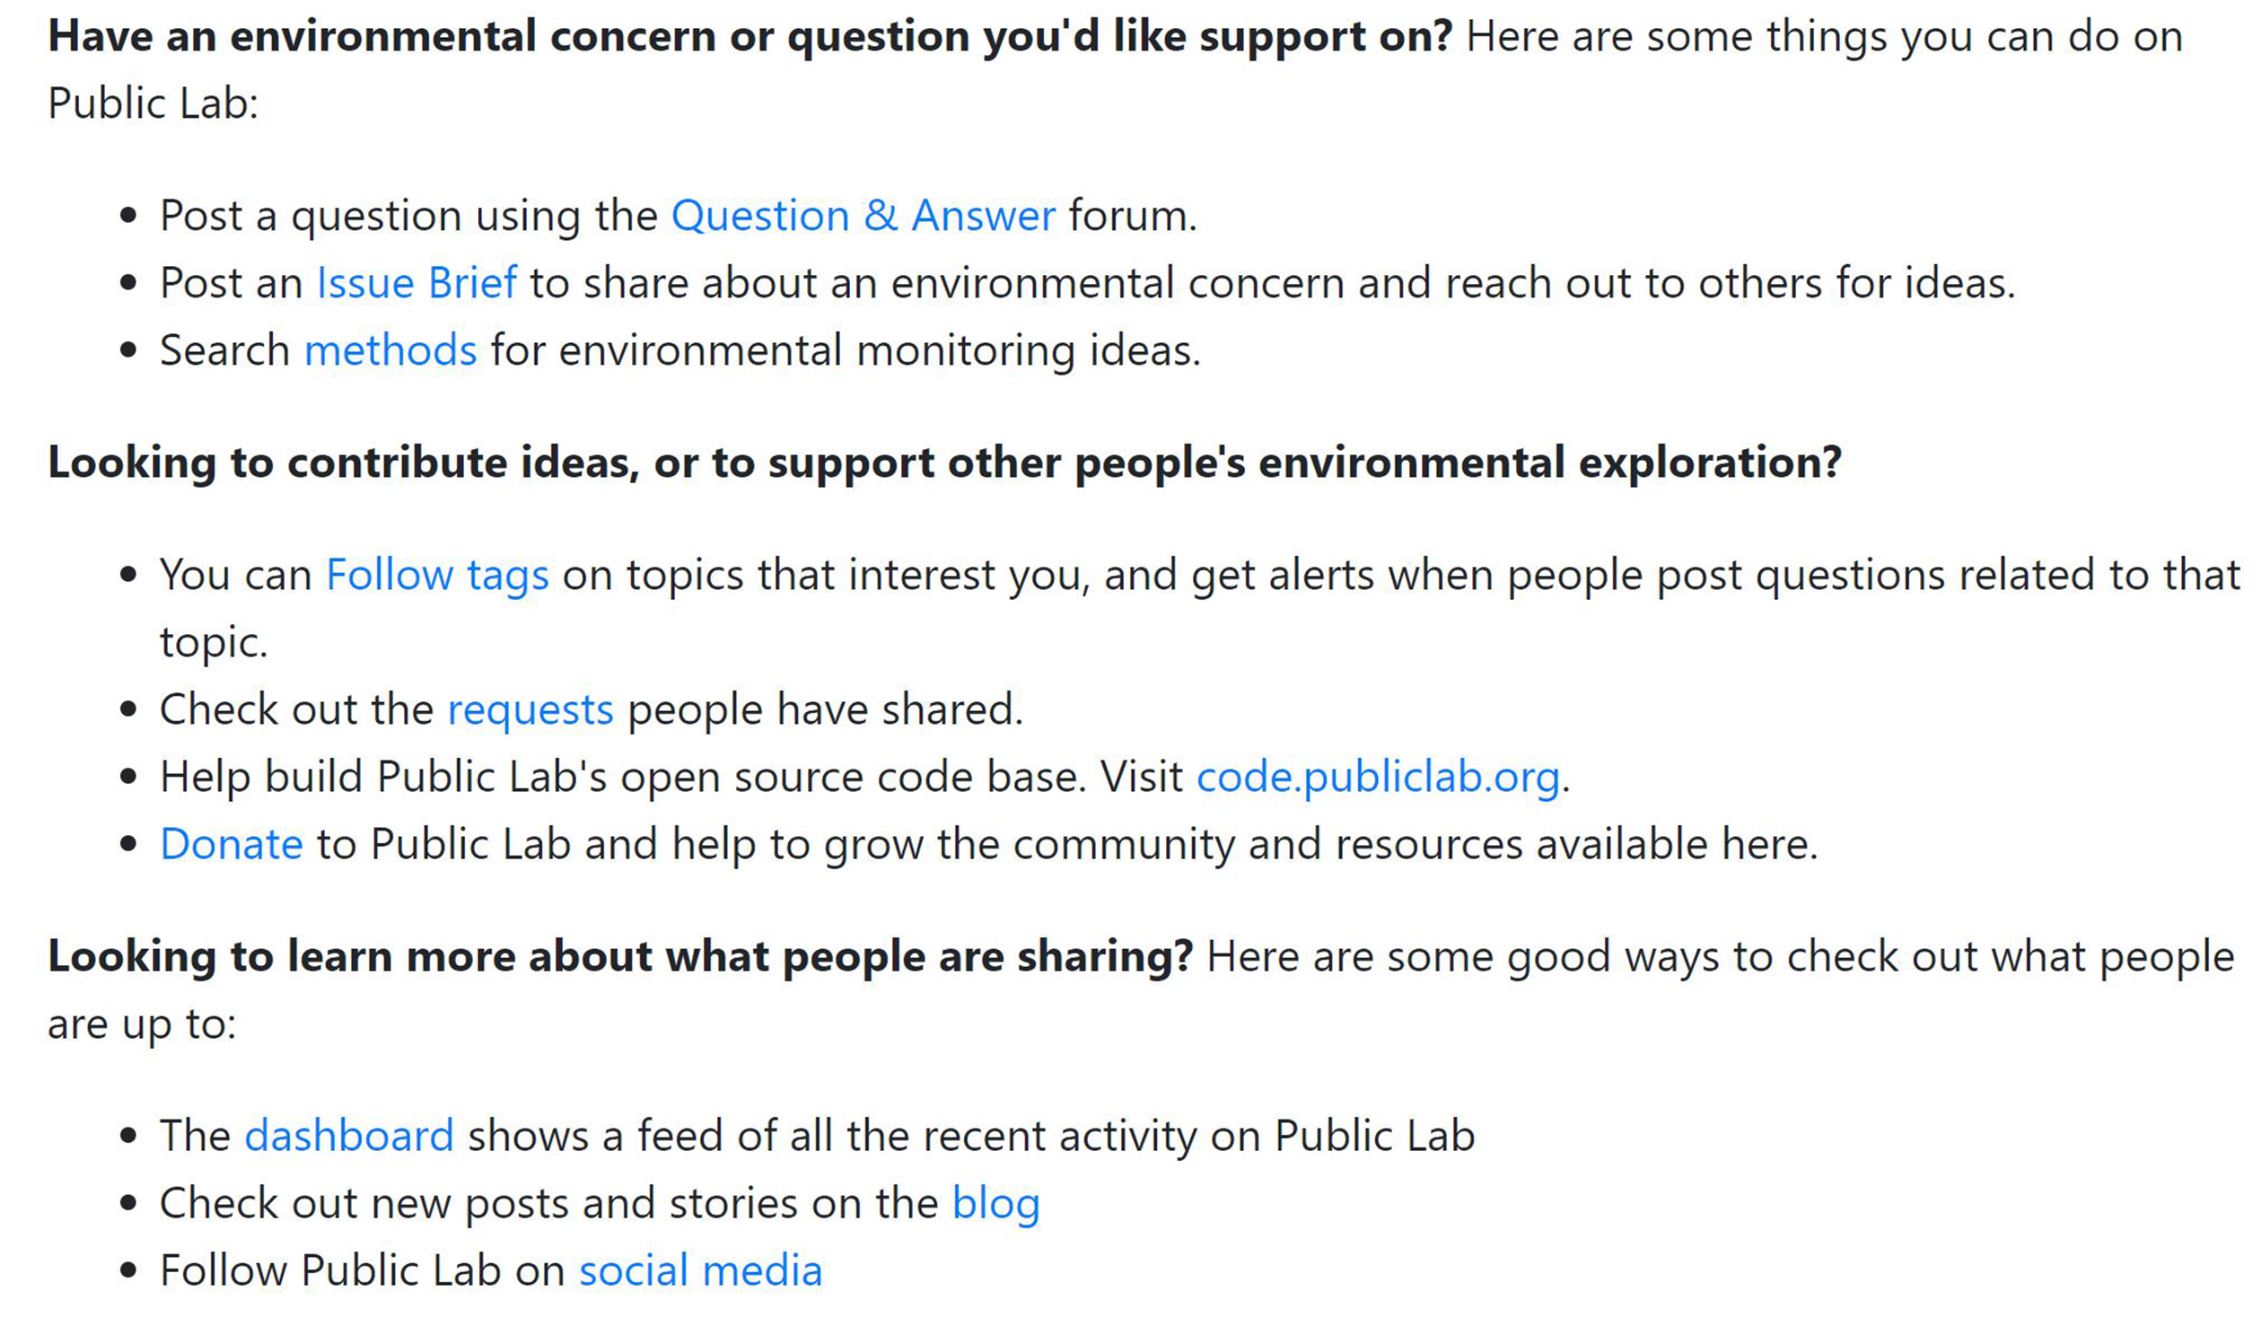 A screenshot of the welcome page of Public Lab, containing suggestions of first steps to take on the platform as a new user. Link in the figure caption.